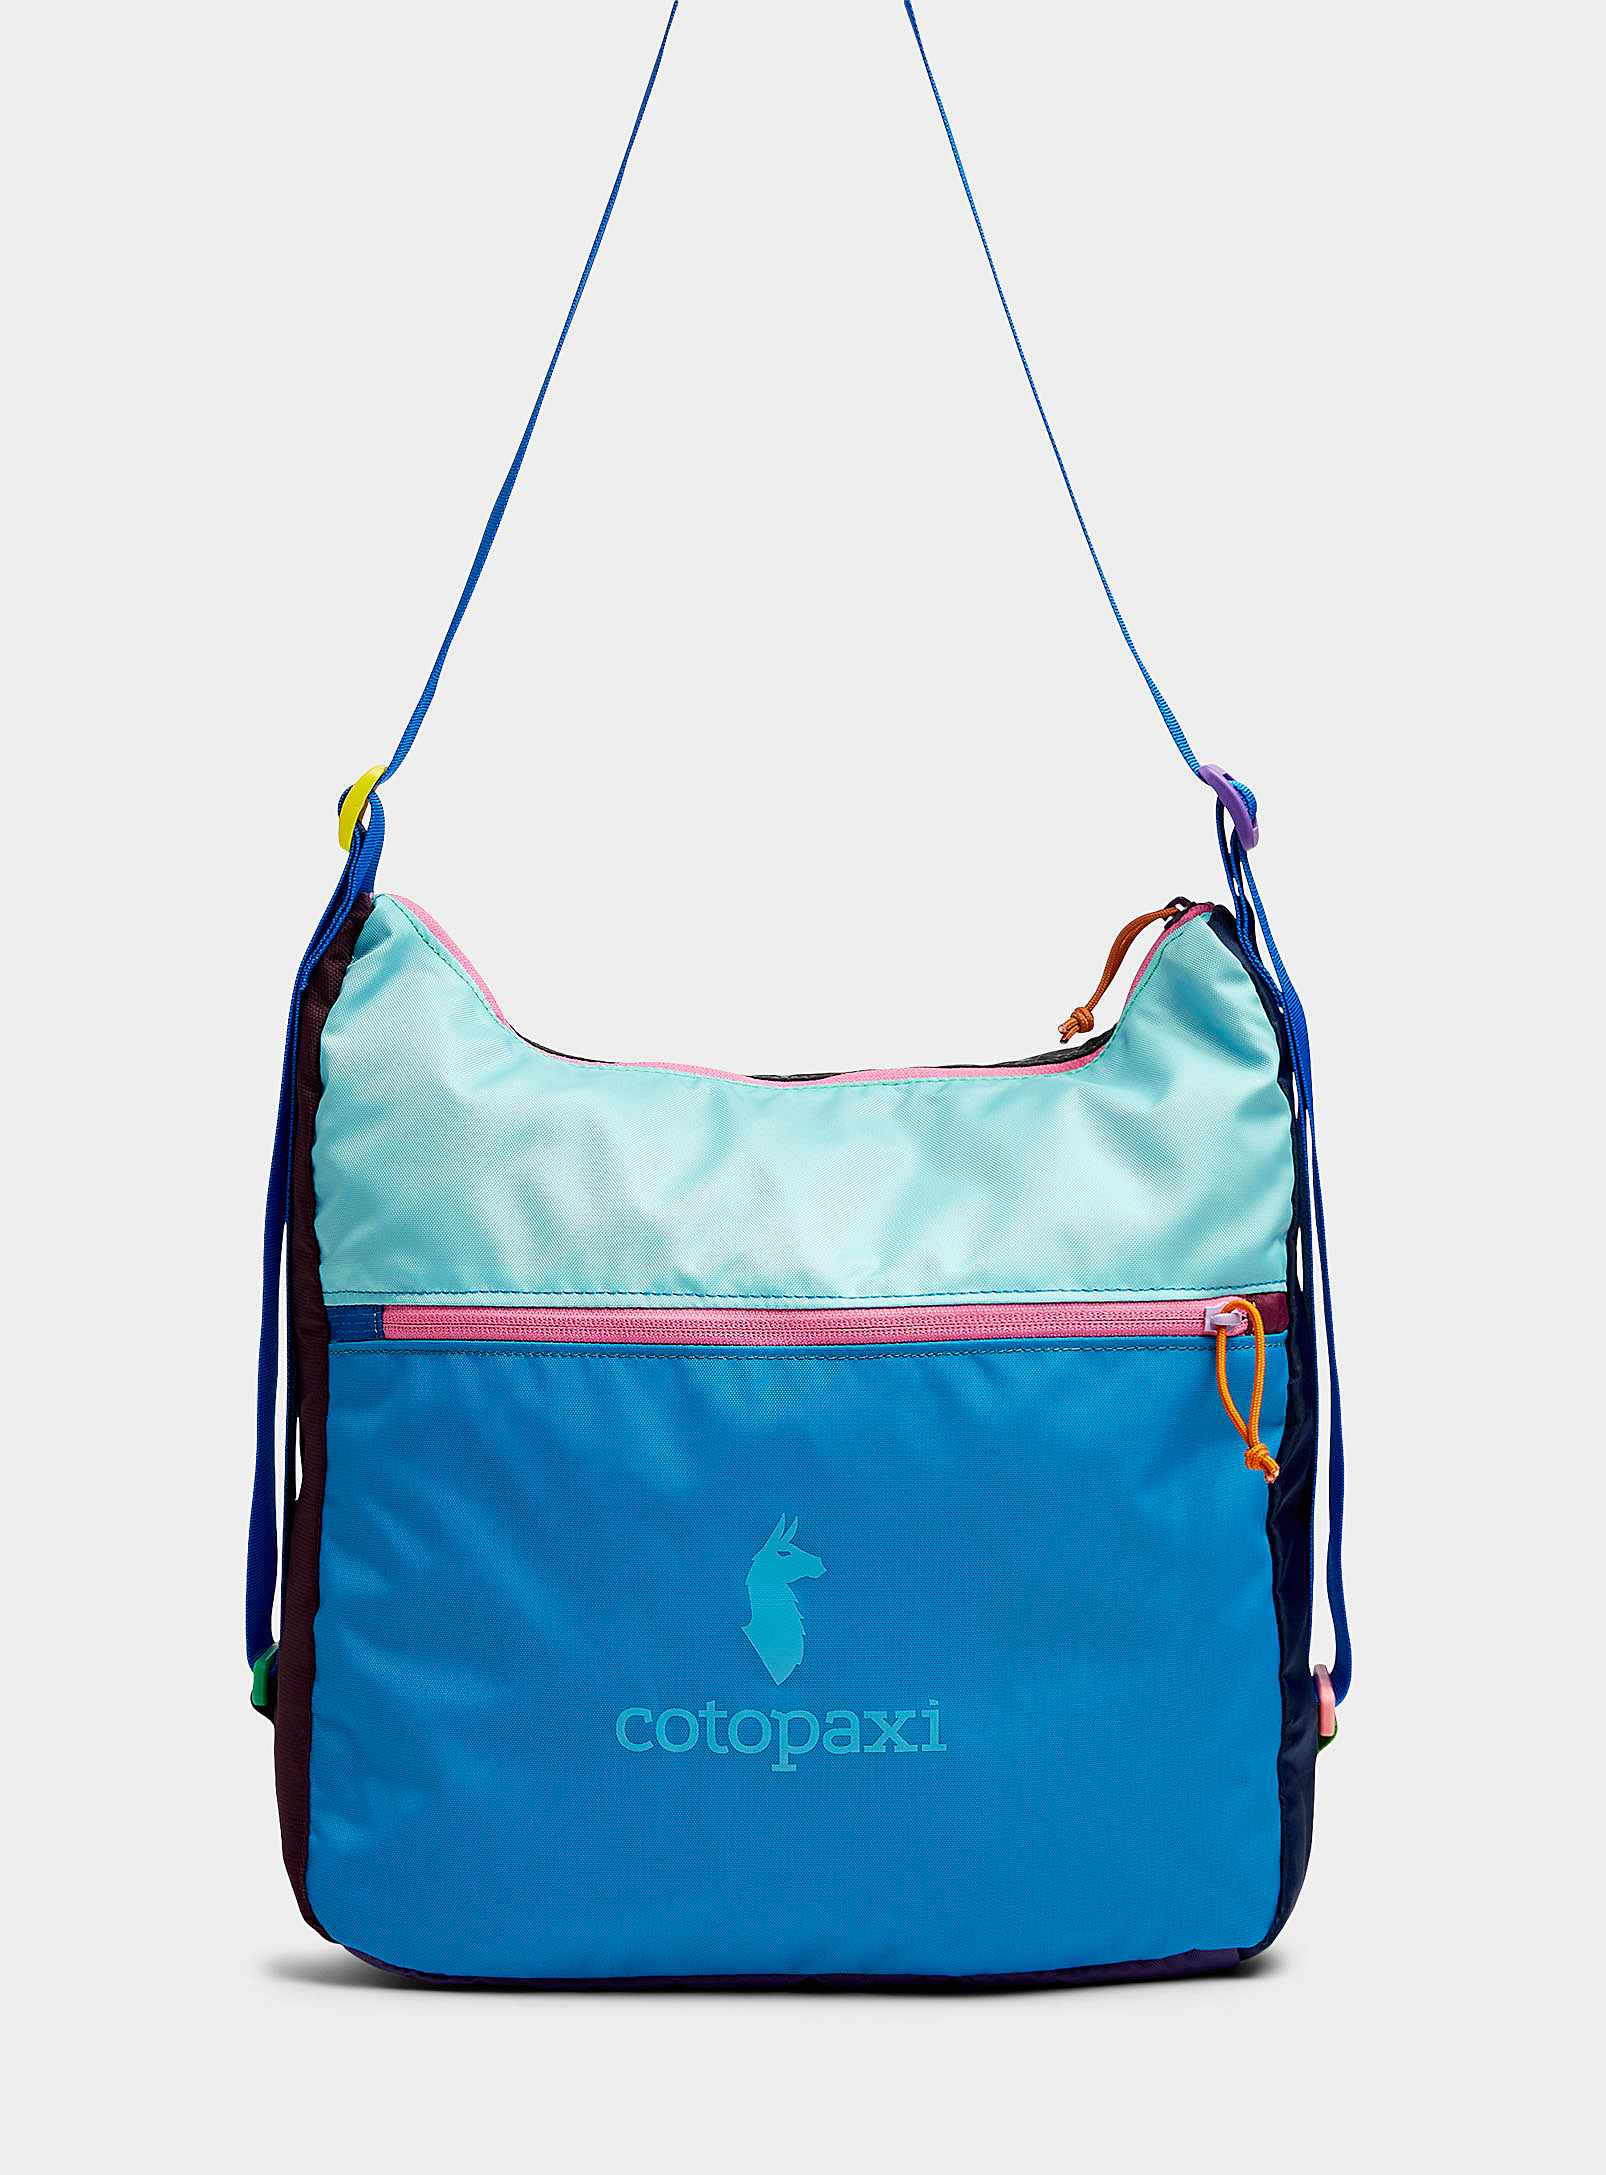 Cotopaxi - Women's Taal convertible shoulder tote